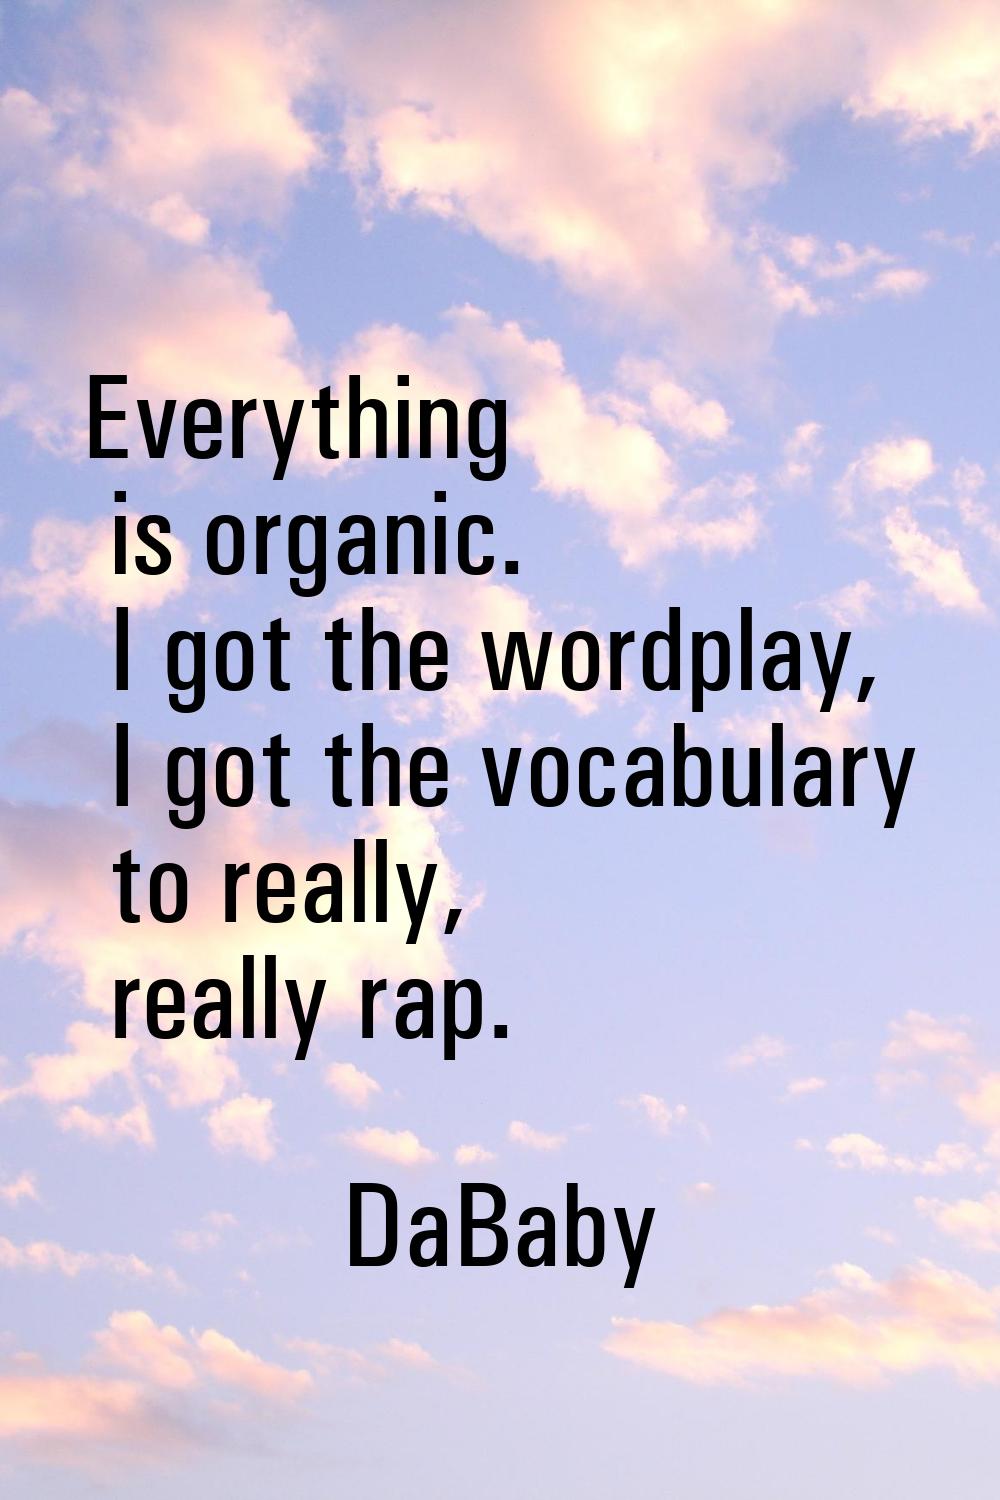 Everything is organic. I got the wordplay, I got the vocabulary to really, really rap.